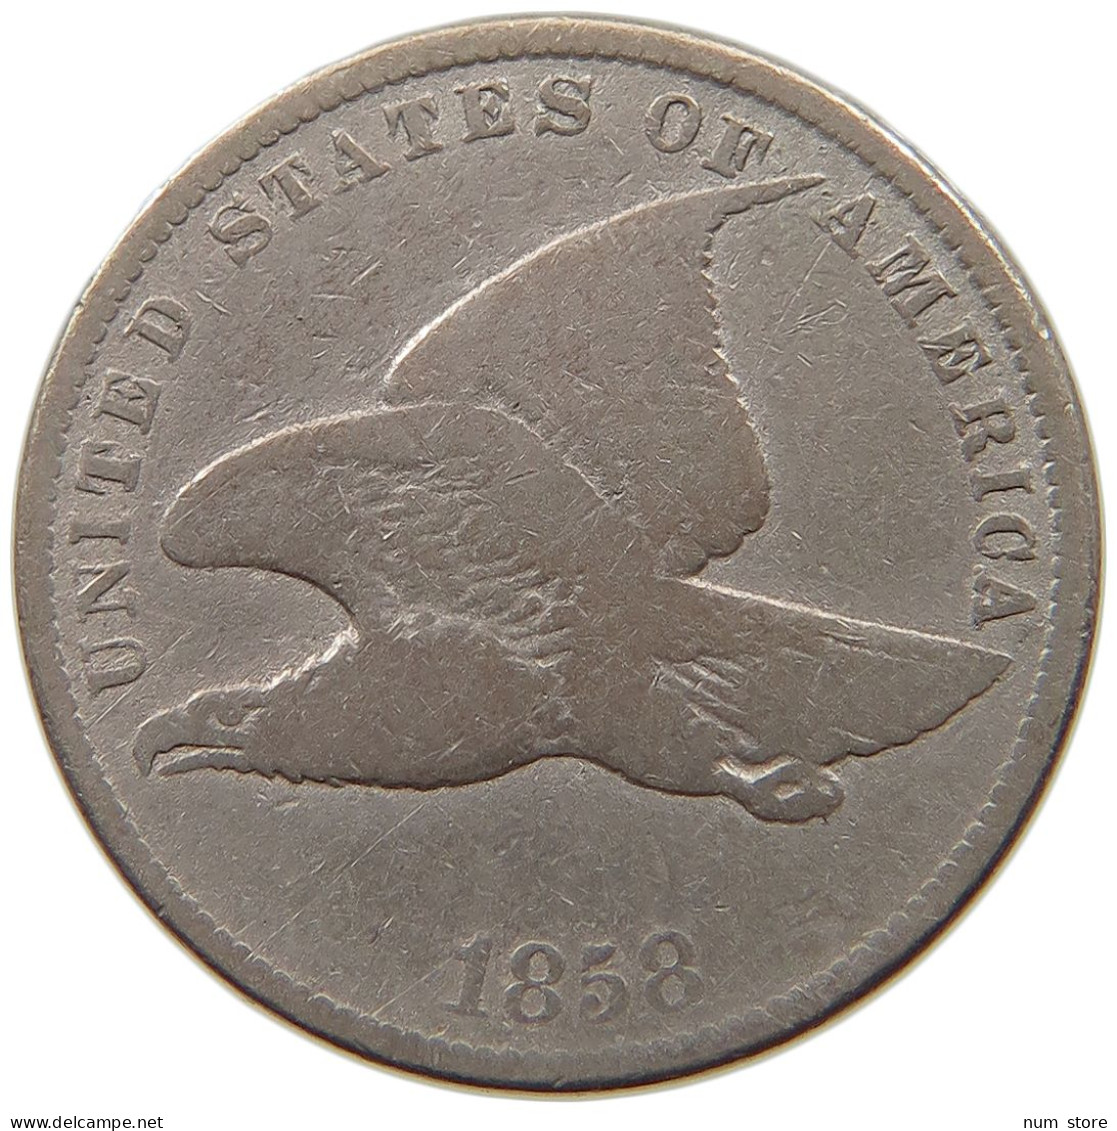 UNITED STATES OF AMERICA CENT 1858 FLYING EAGLE #a034 0887 - 1856-1858: Flying Eagle